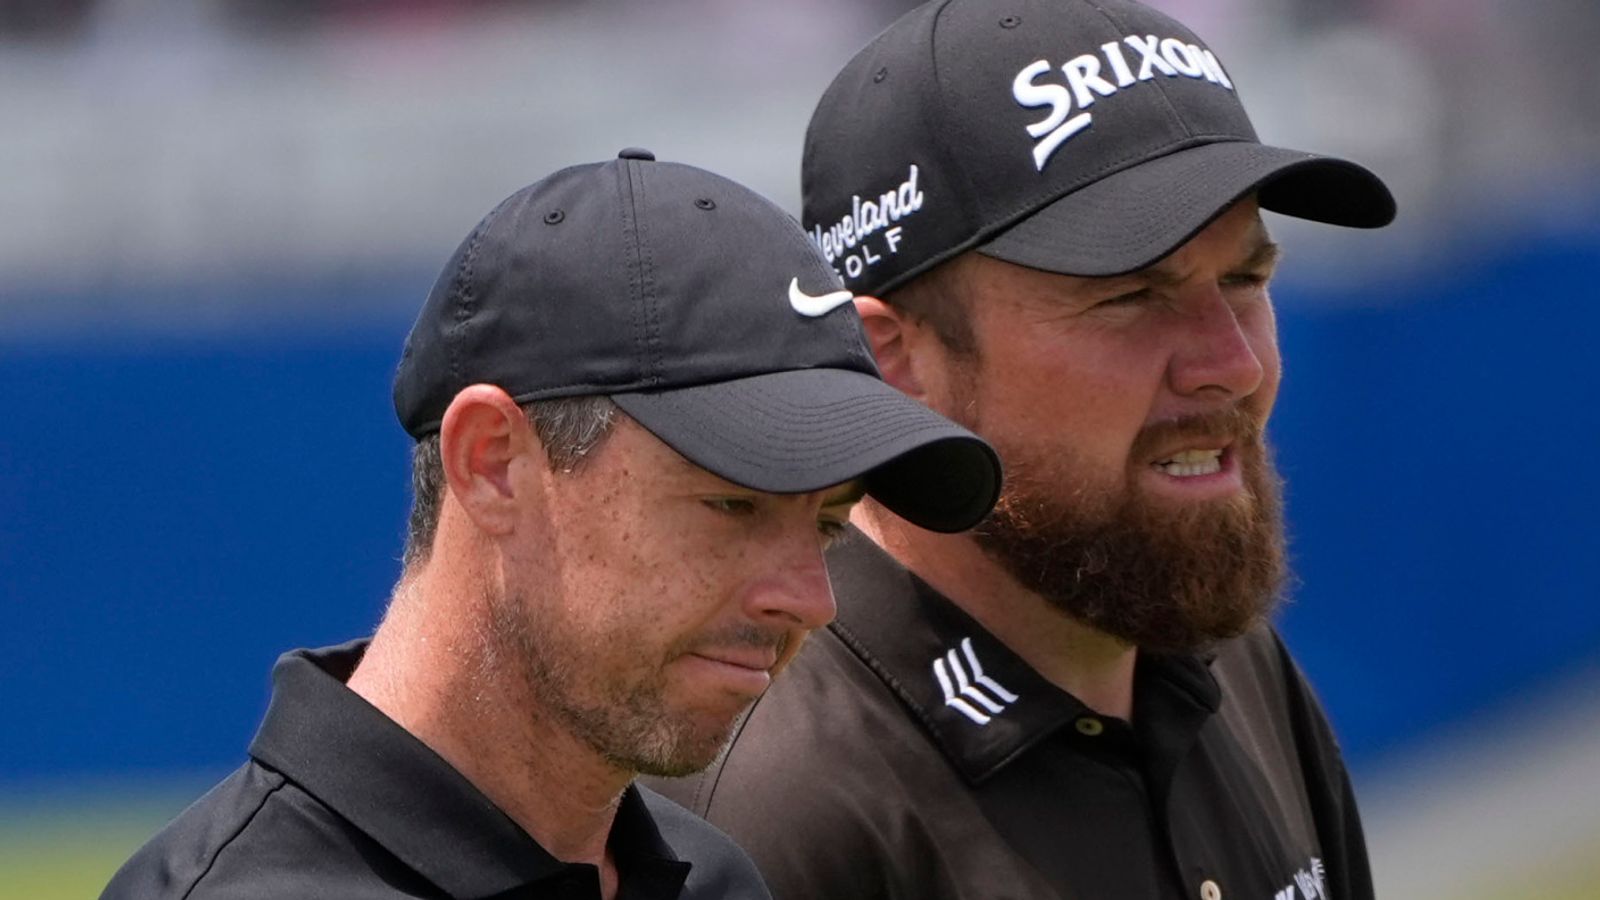 Rory McIlroy and Shane Lowry tied for the lead at Zurich Classic | Golf News